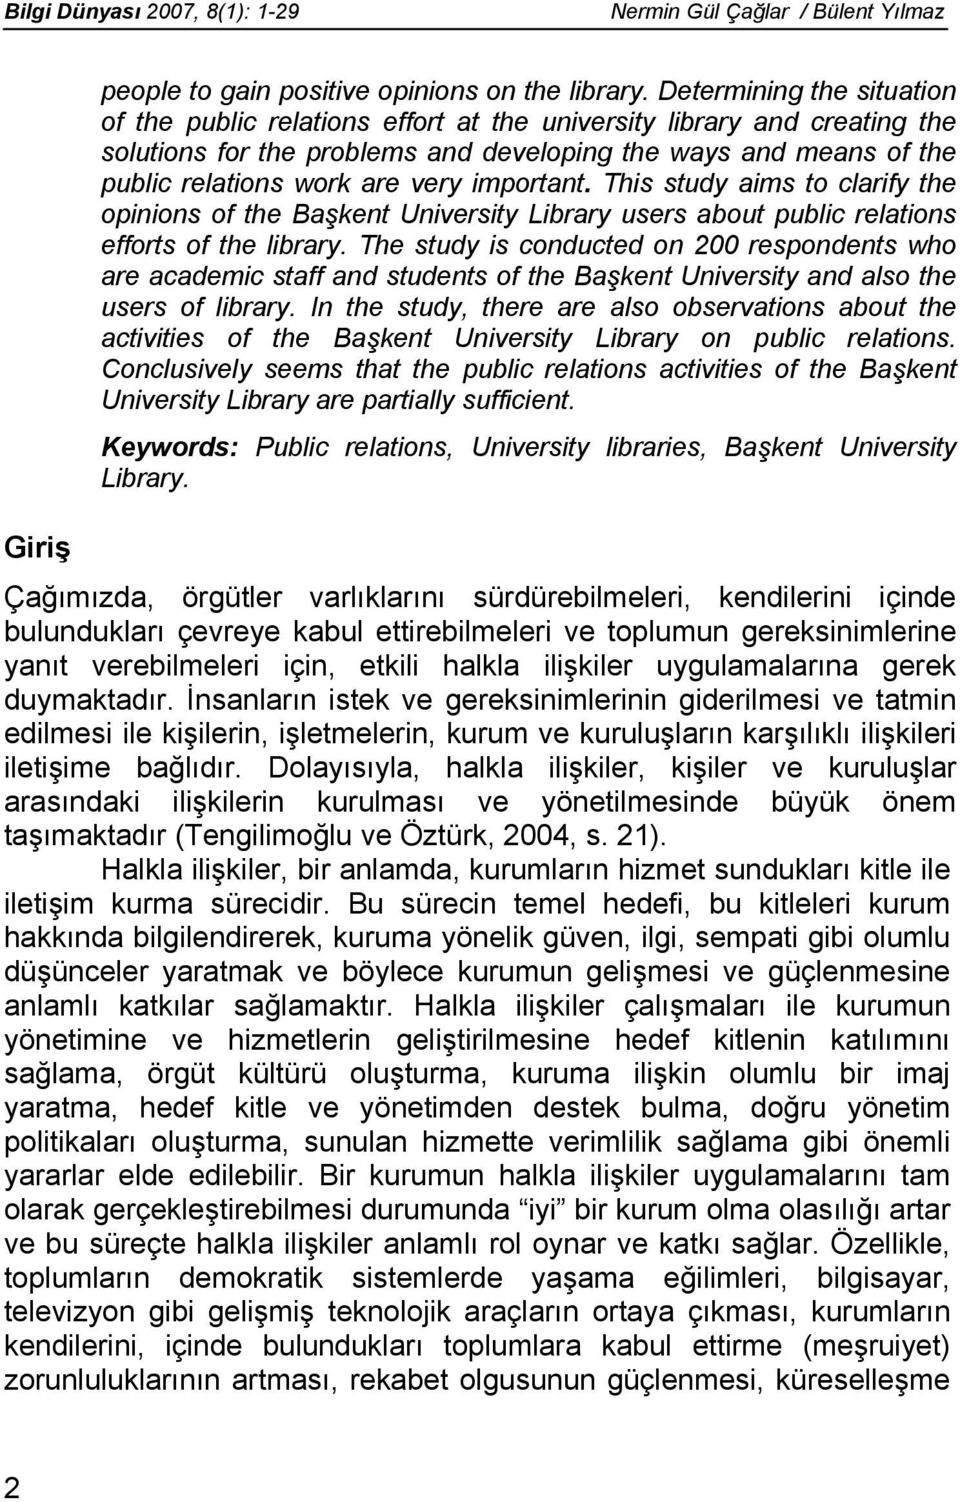 important. This study aims to clarify the opinions of the Başkent University Library users about public relations efforts of the library.